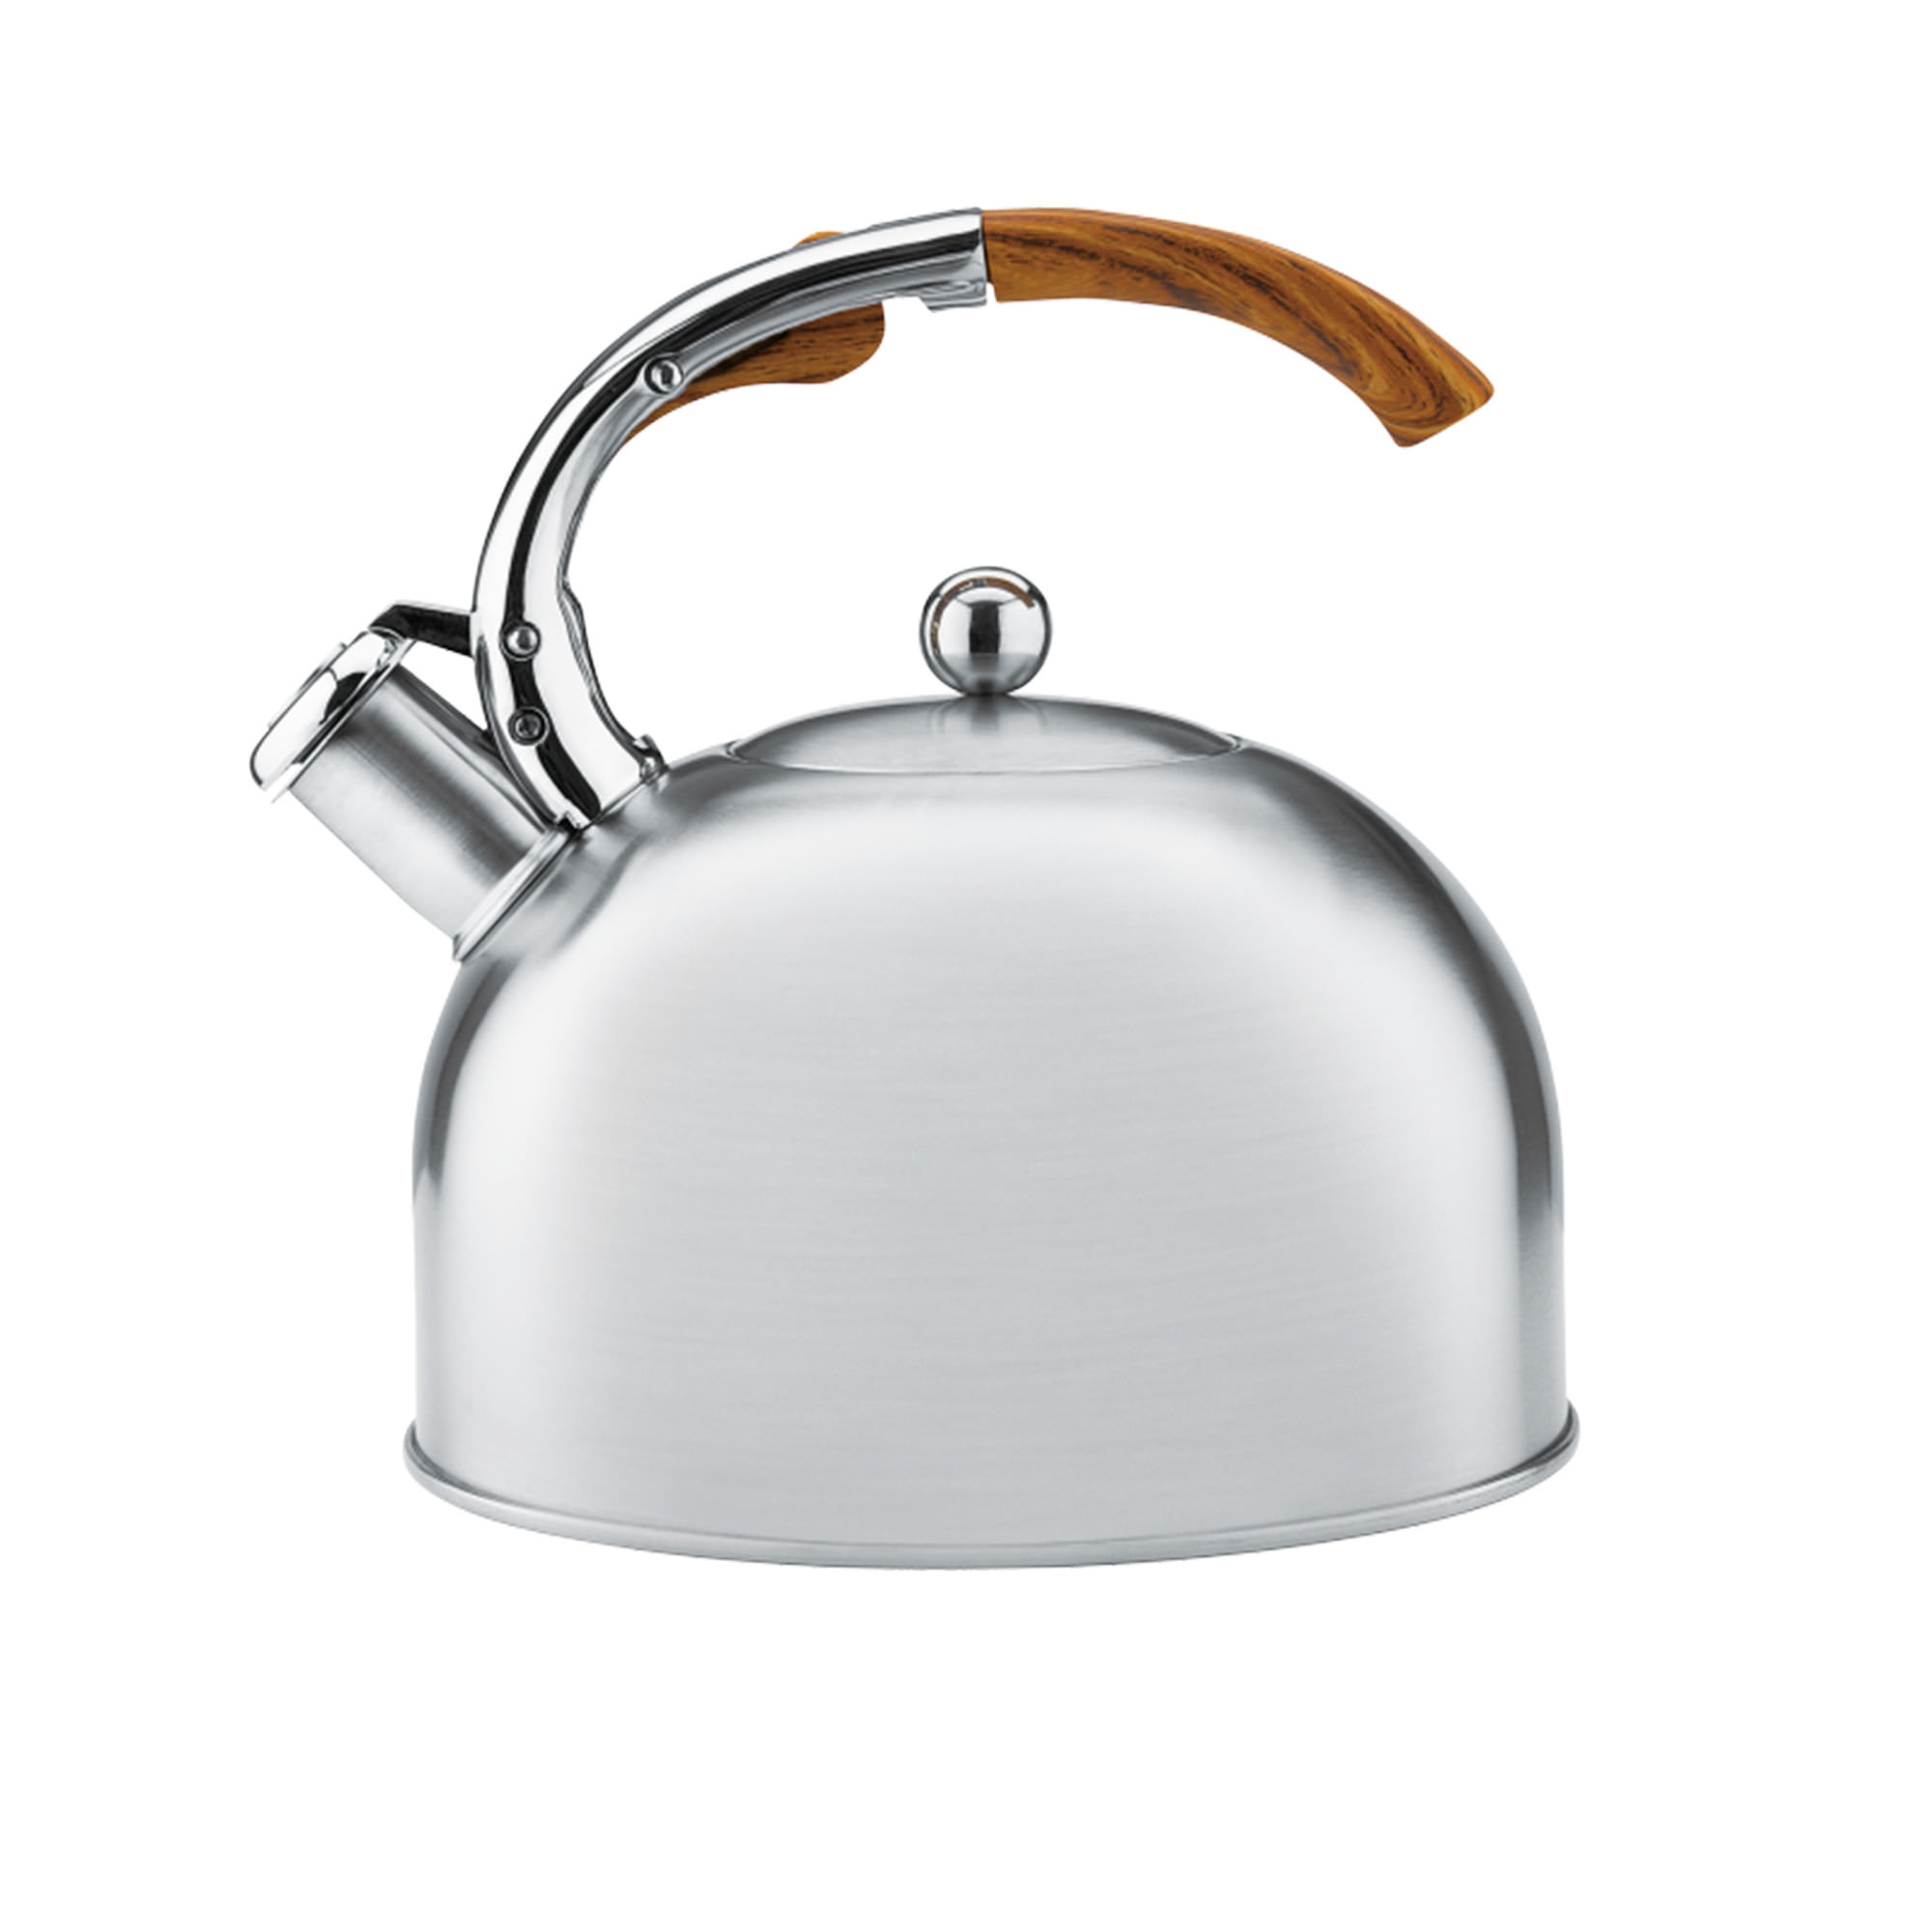 Raco Elements Stainless Steel Stovetop Kettle 2.5L Image 1